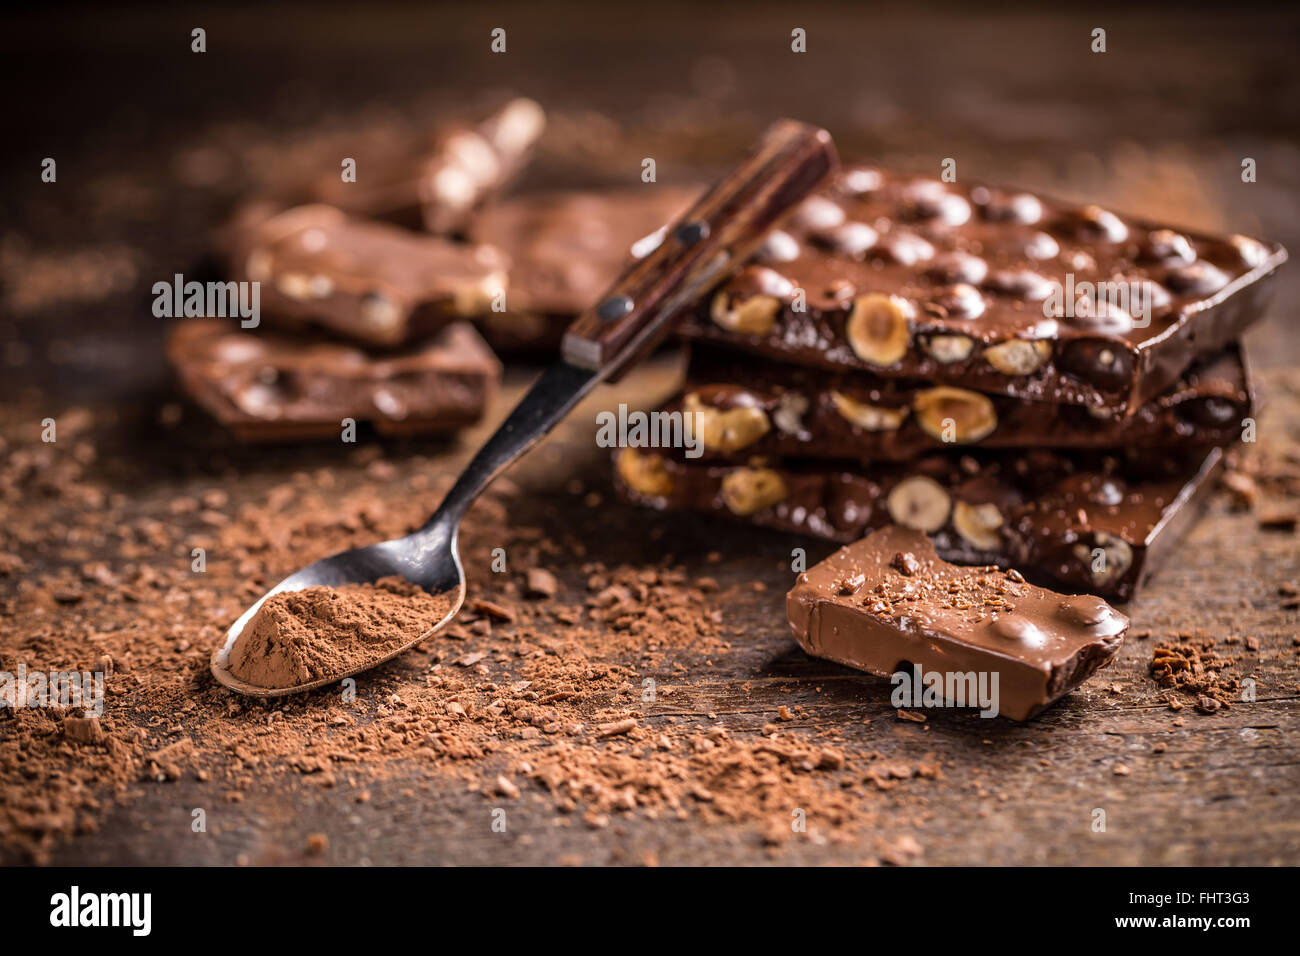 Chocolate with nuts on wooden background Stock Photo